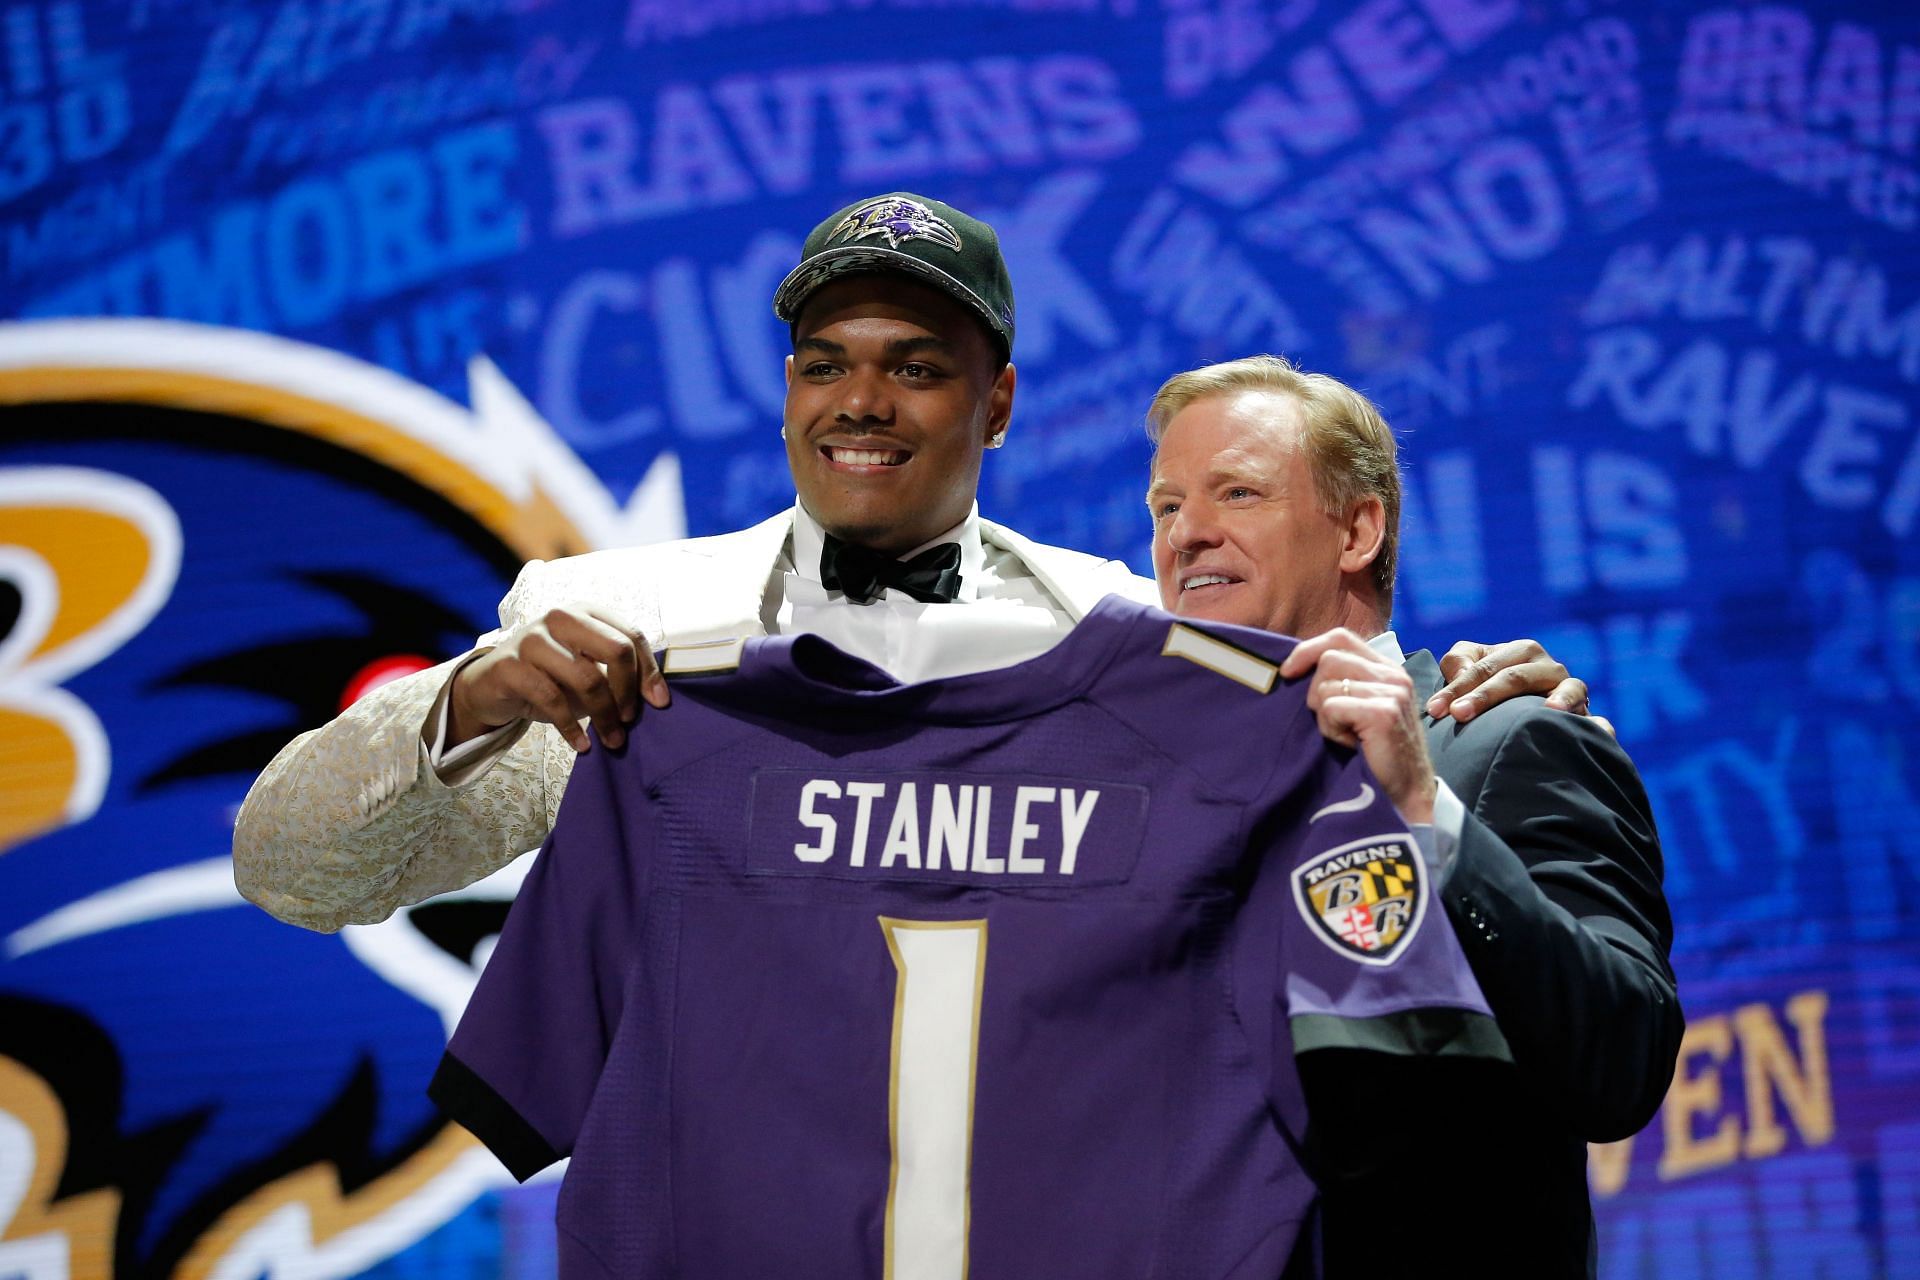 N Ronnie Stanley at the NFL Draft